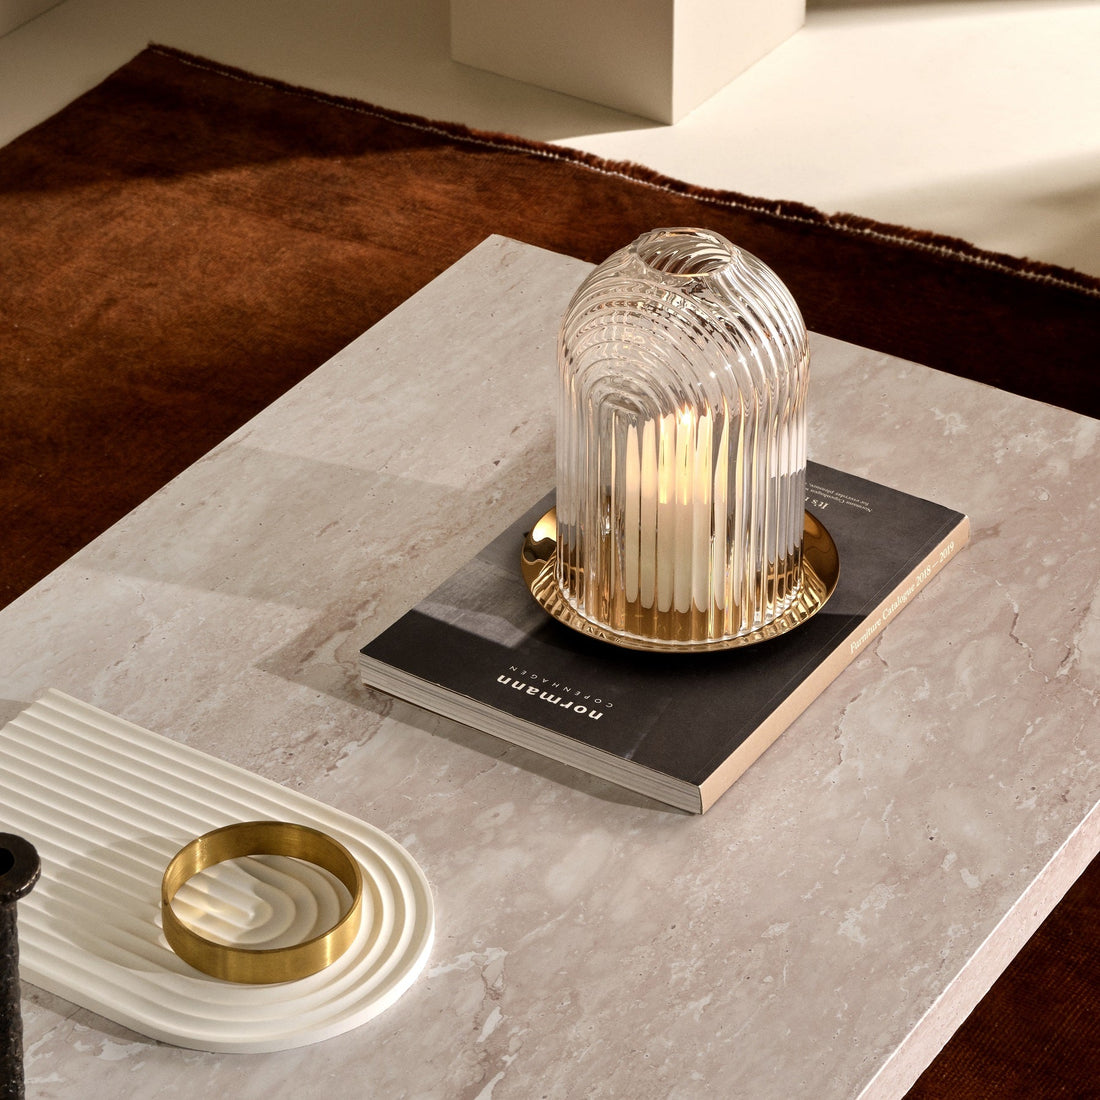 Lead-free crystal candle holder Ilo in small, a dome shaped candle holder with rippled glass effect, with candle presented on a table with some books and a small rippled tray in a dome shape